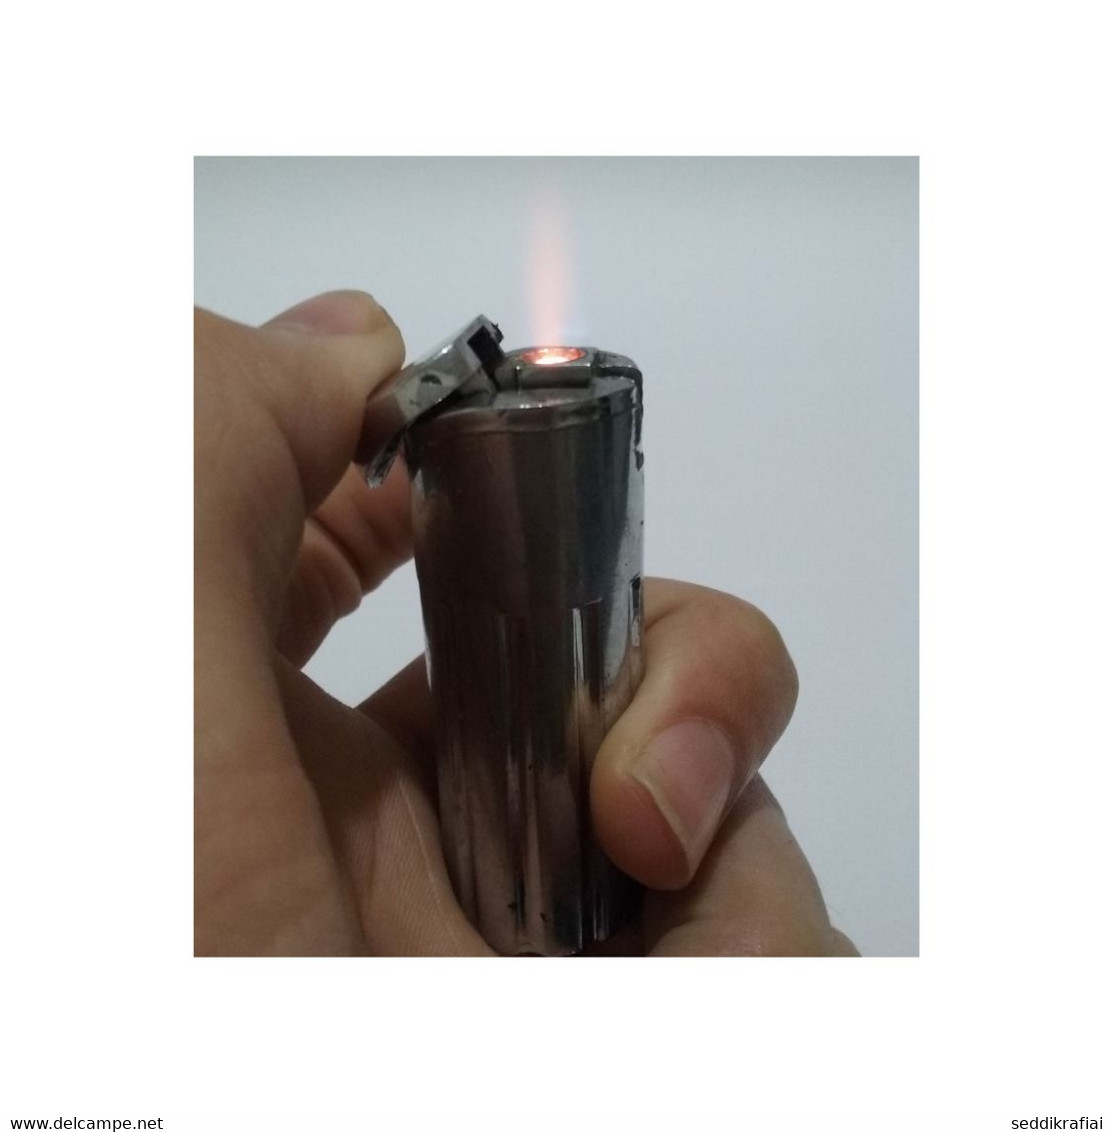 Lighter New Jet Flam Windproof Smoking Cigarettes Working Silver Collectible